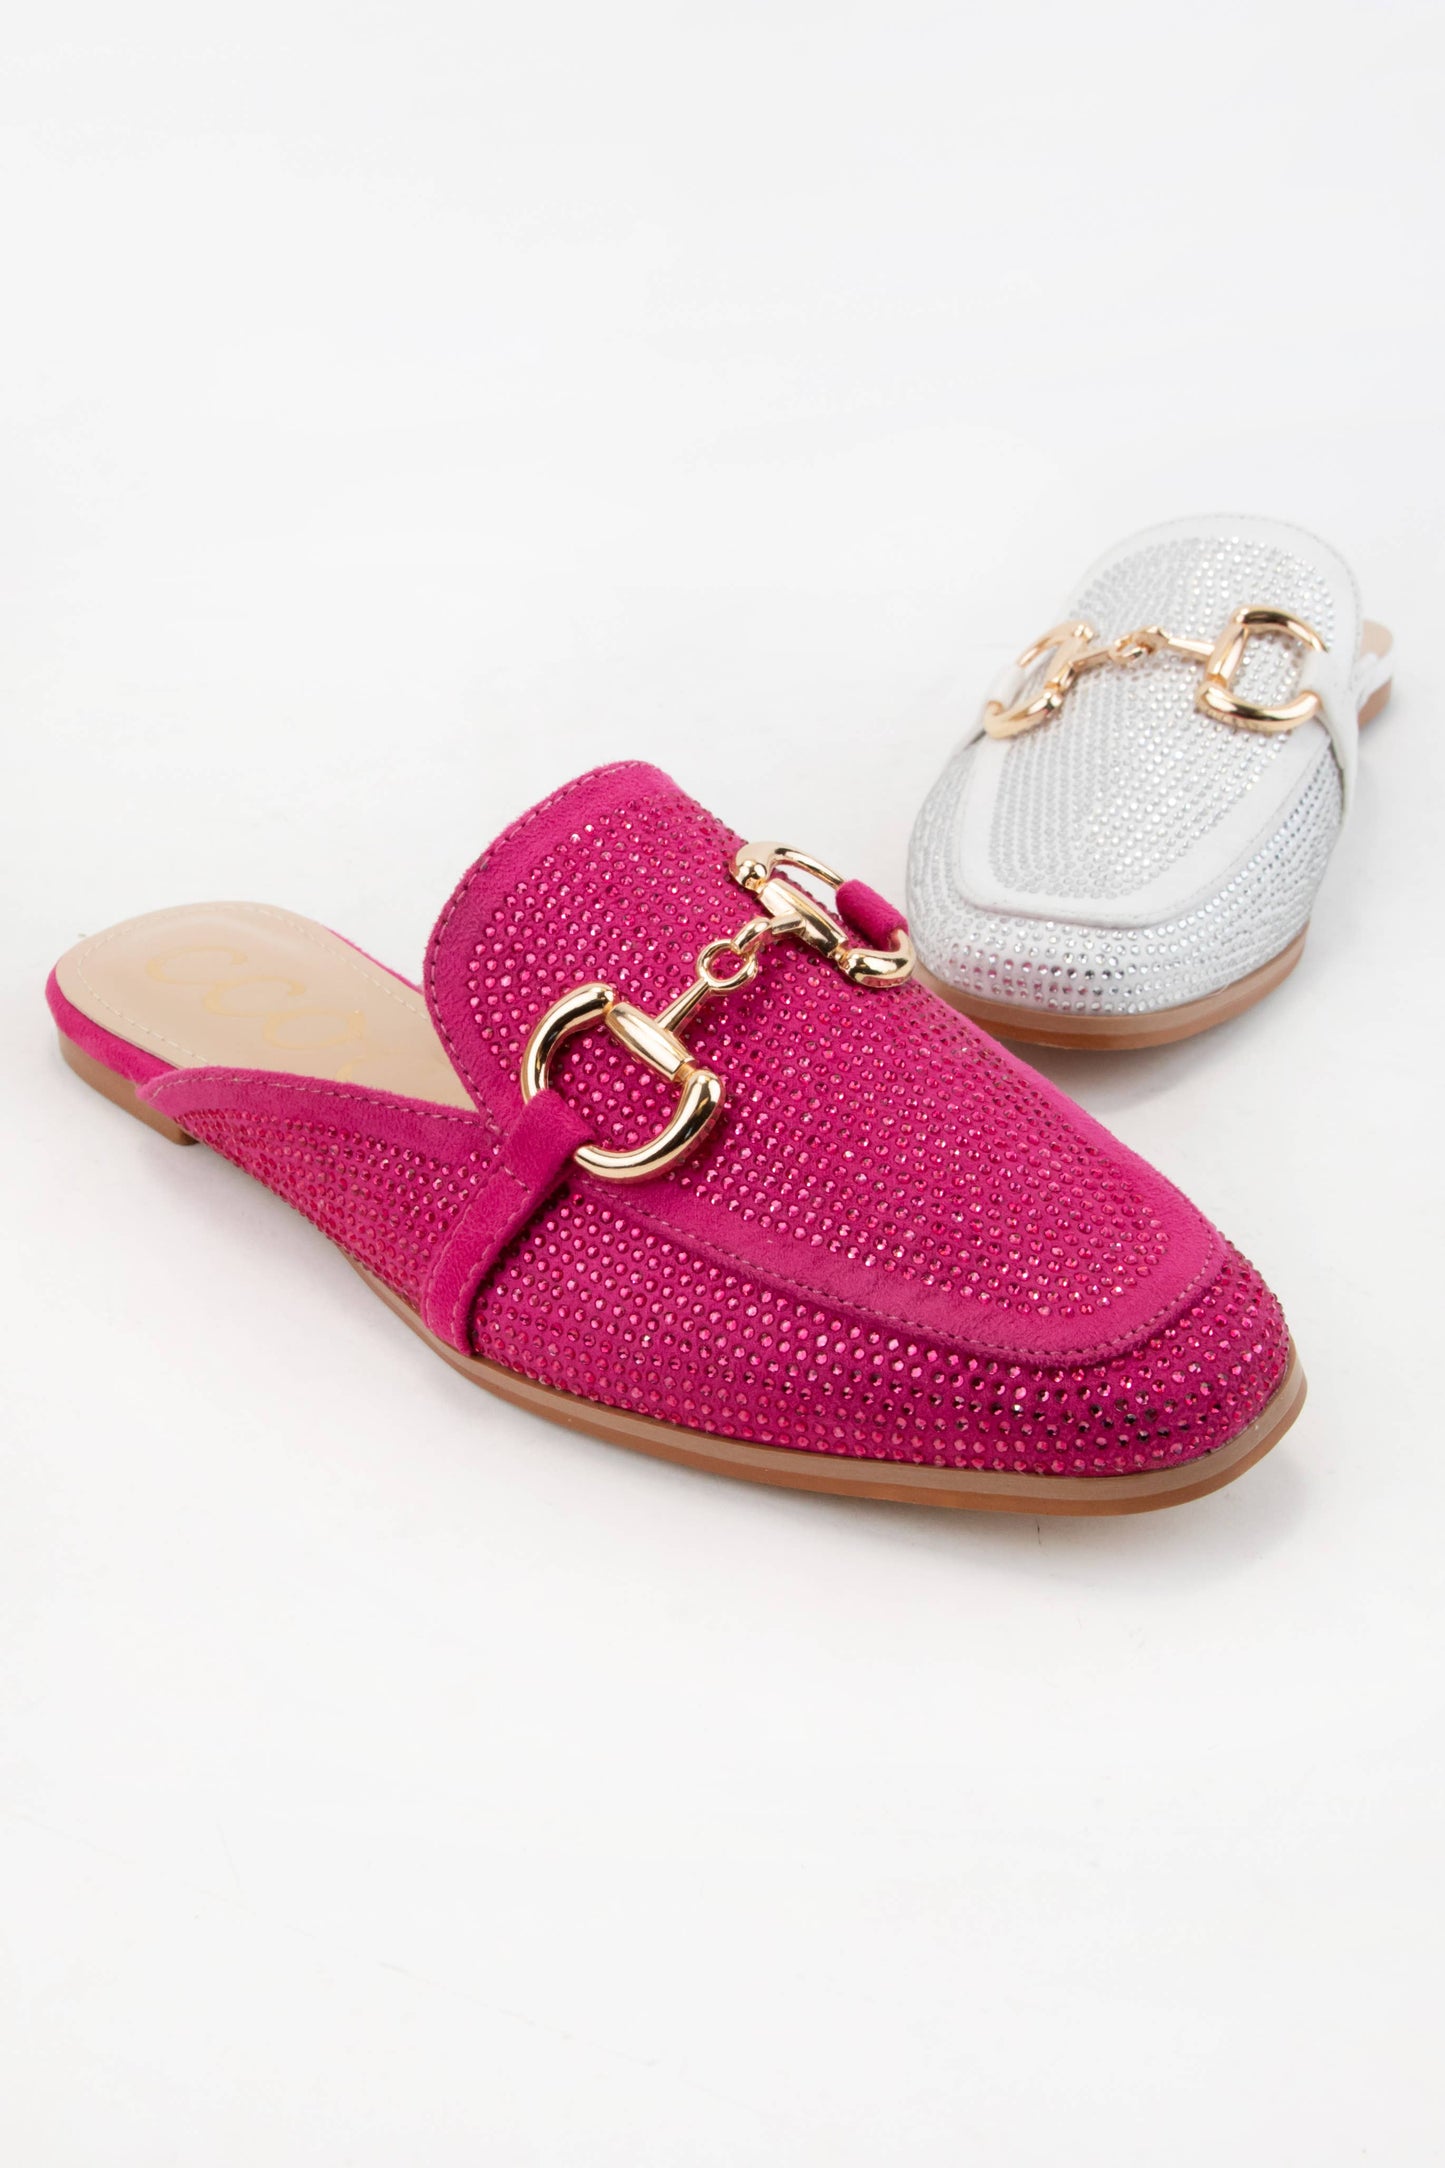 BEDAZZLED FUCHSIA LOAFER FLAT MULE